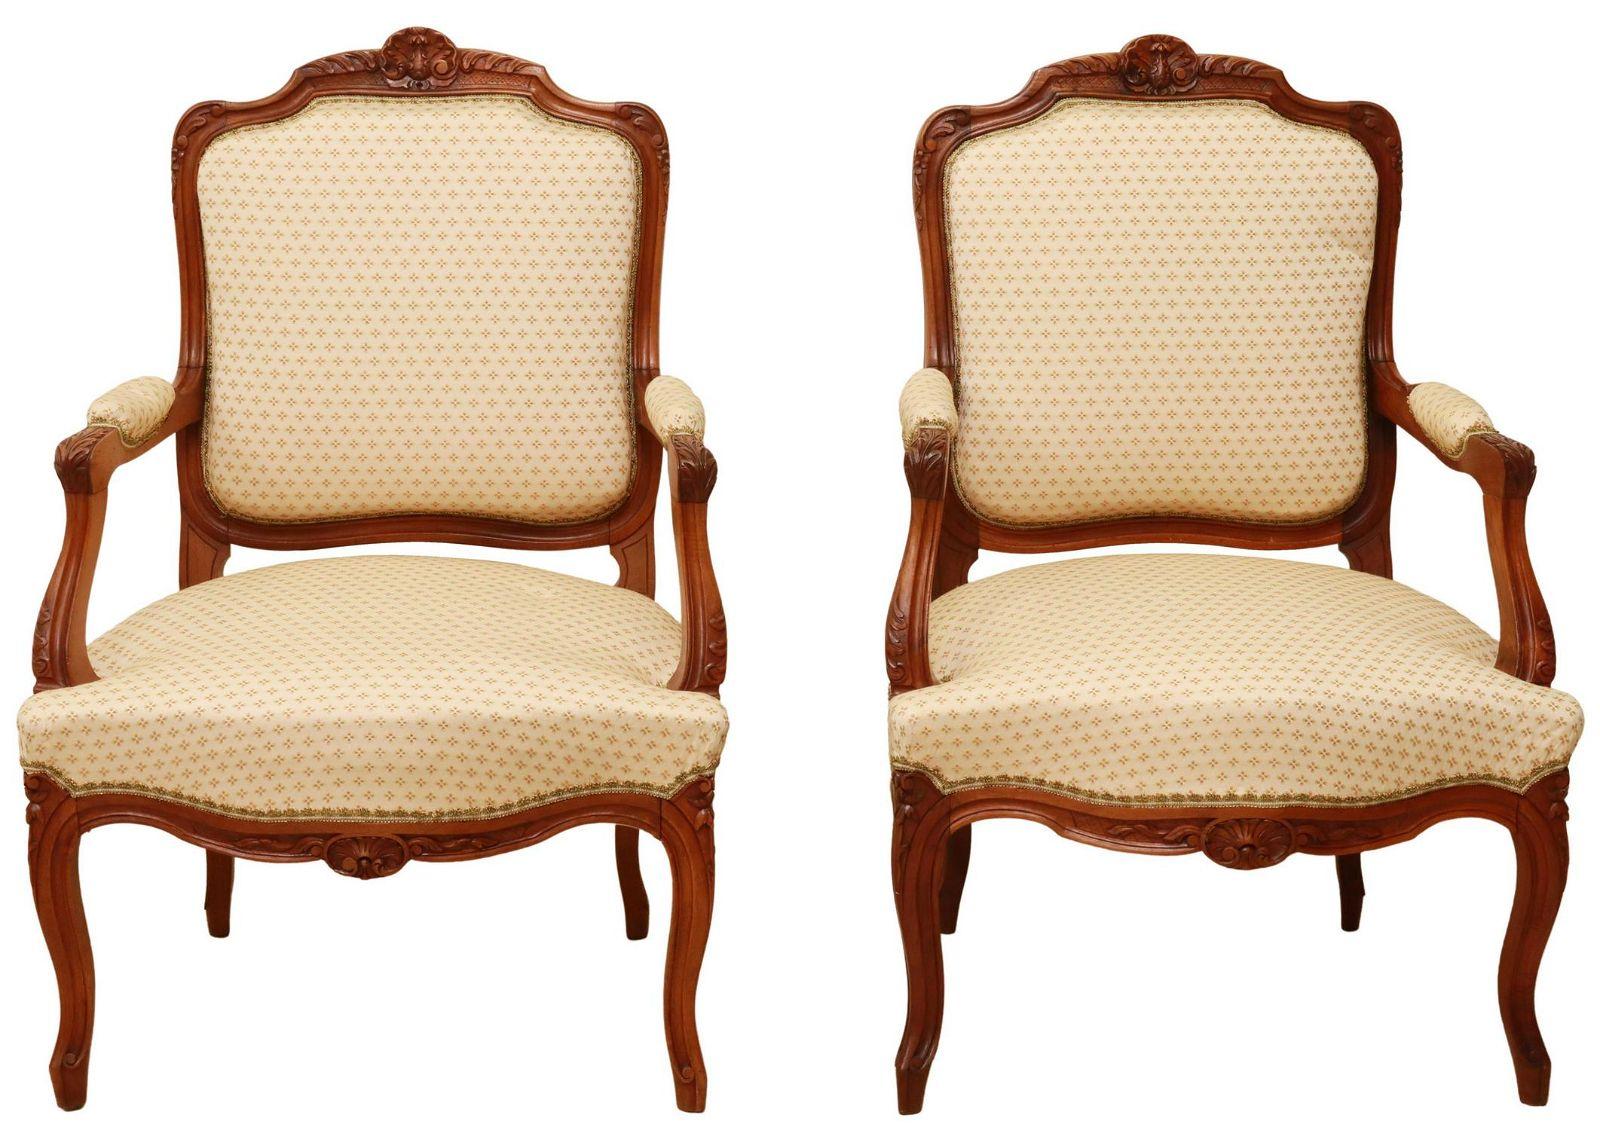 French Louis XV style armchairs, 20th c., having carved rocaille crest, in a floral upholstery, with foliate handholds, above shell motif apron, rising on cabriole legs, ending on whorl feet.

Dimensions
approx 37.5